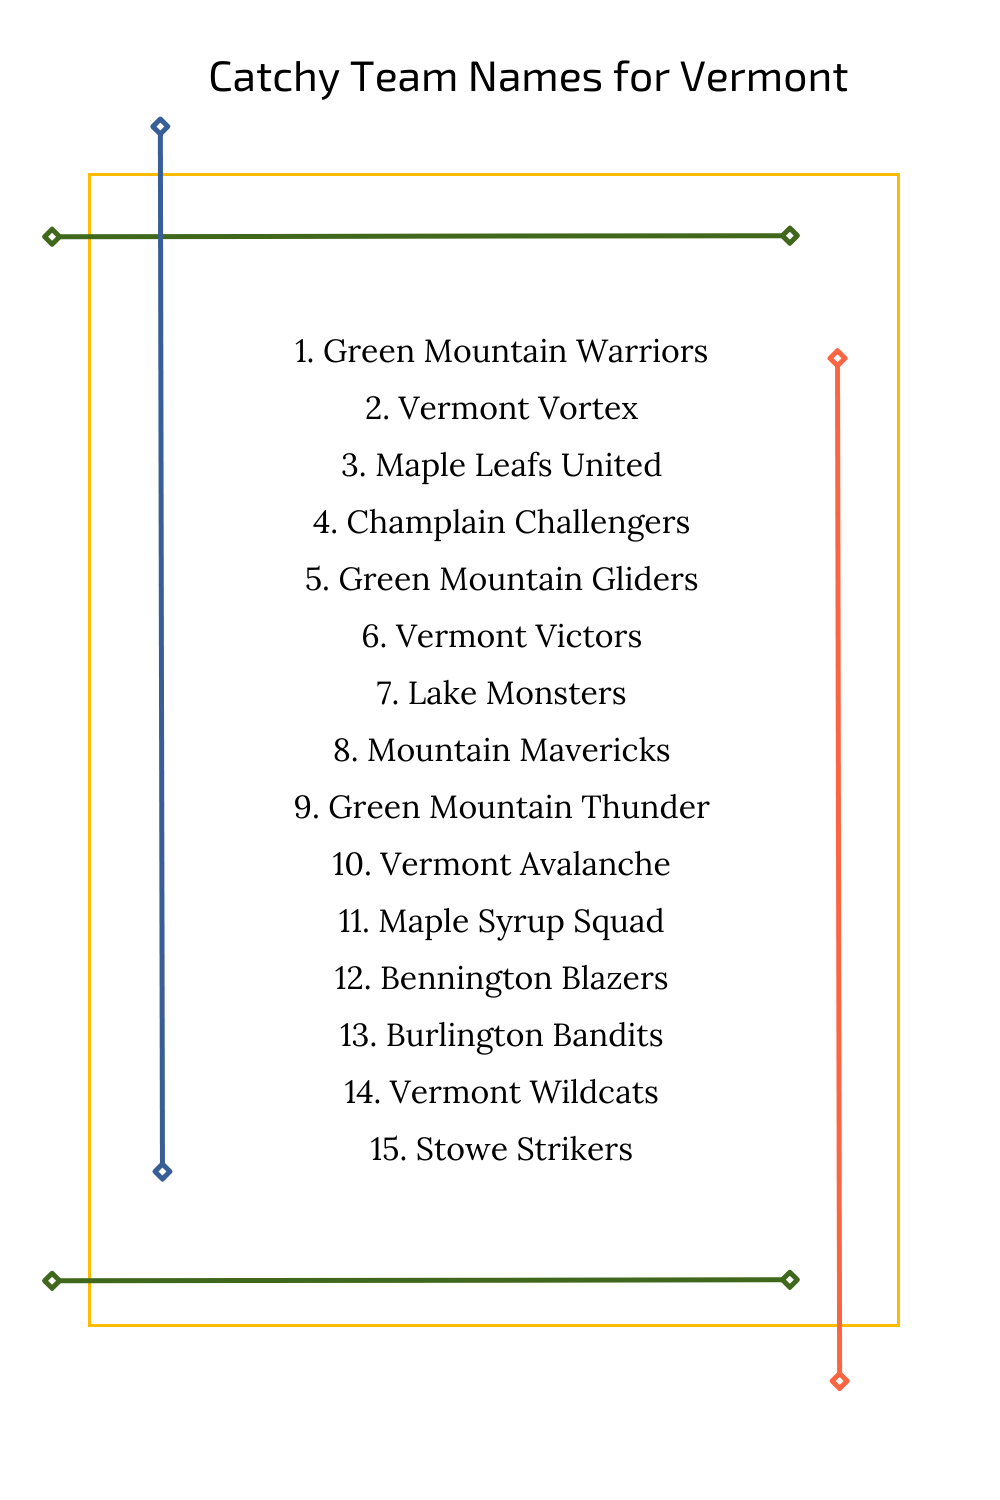 Catchy Team Names for Vermont